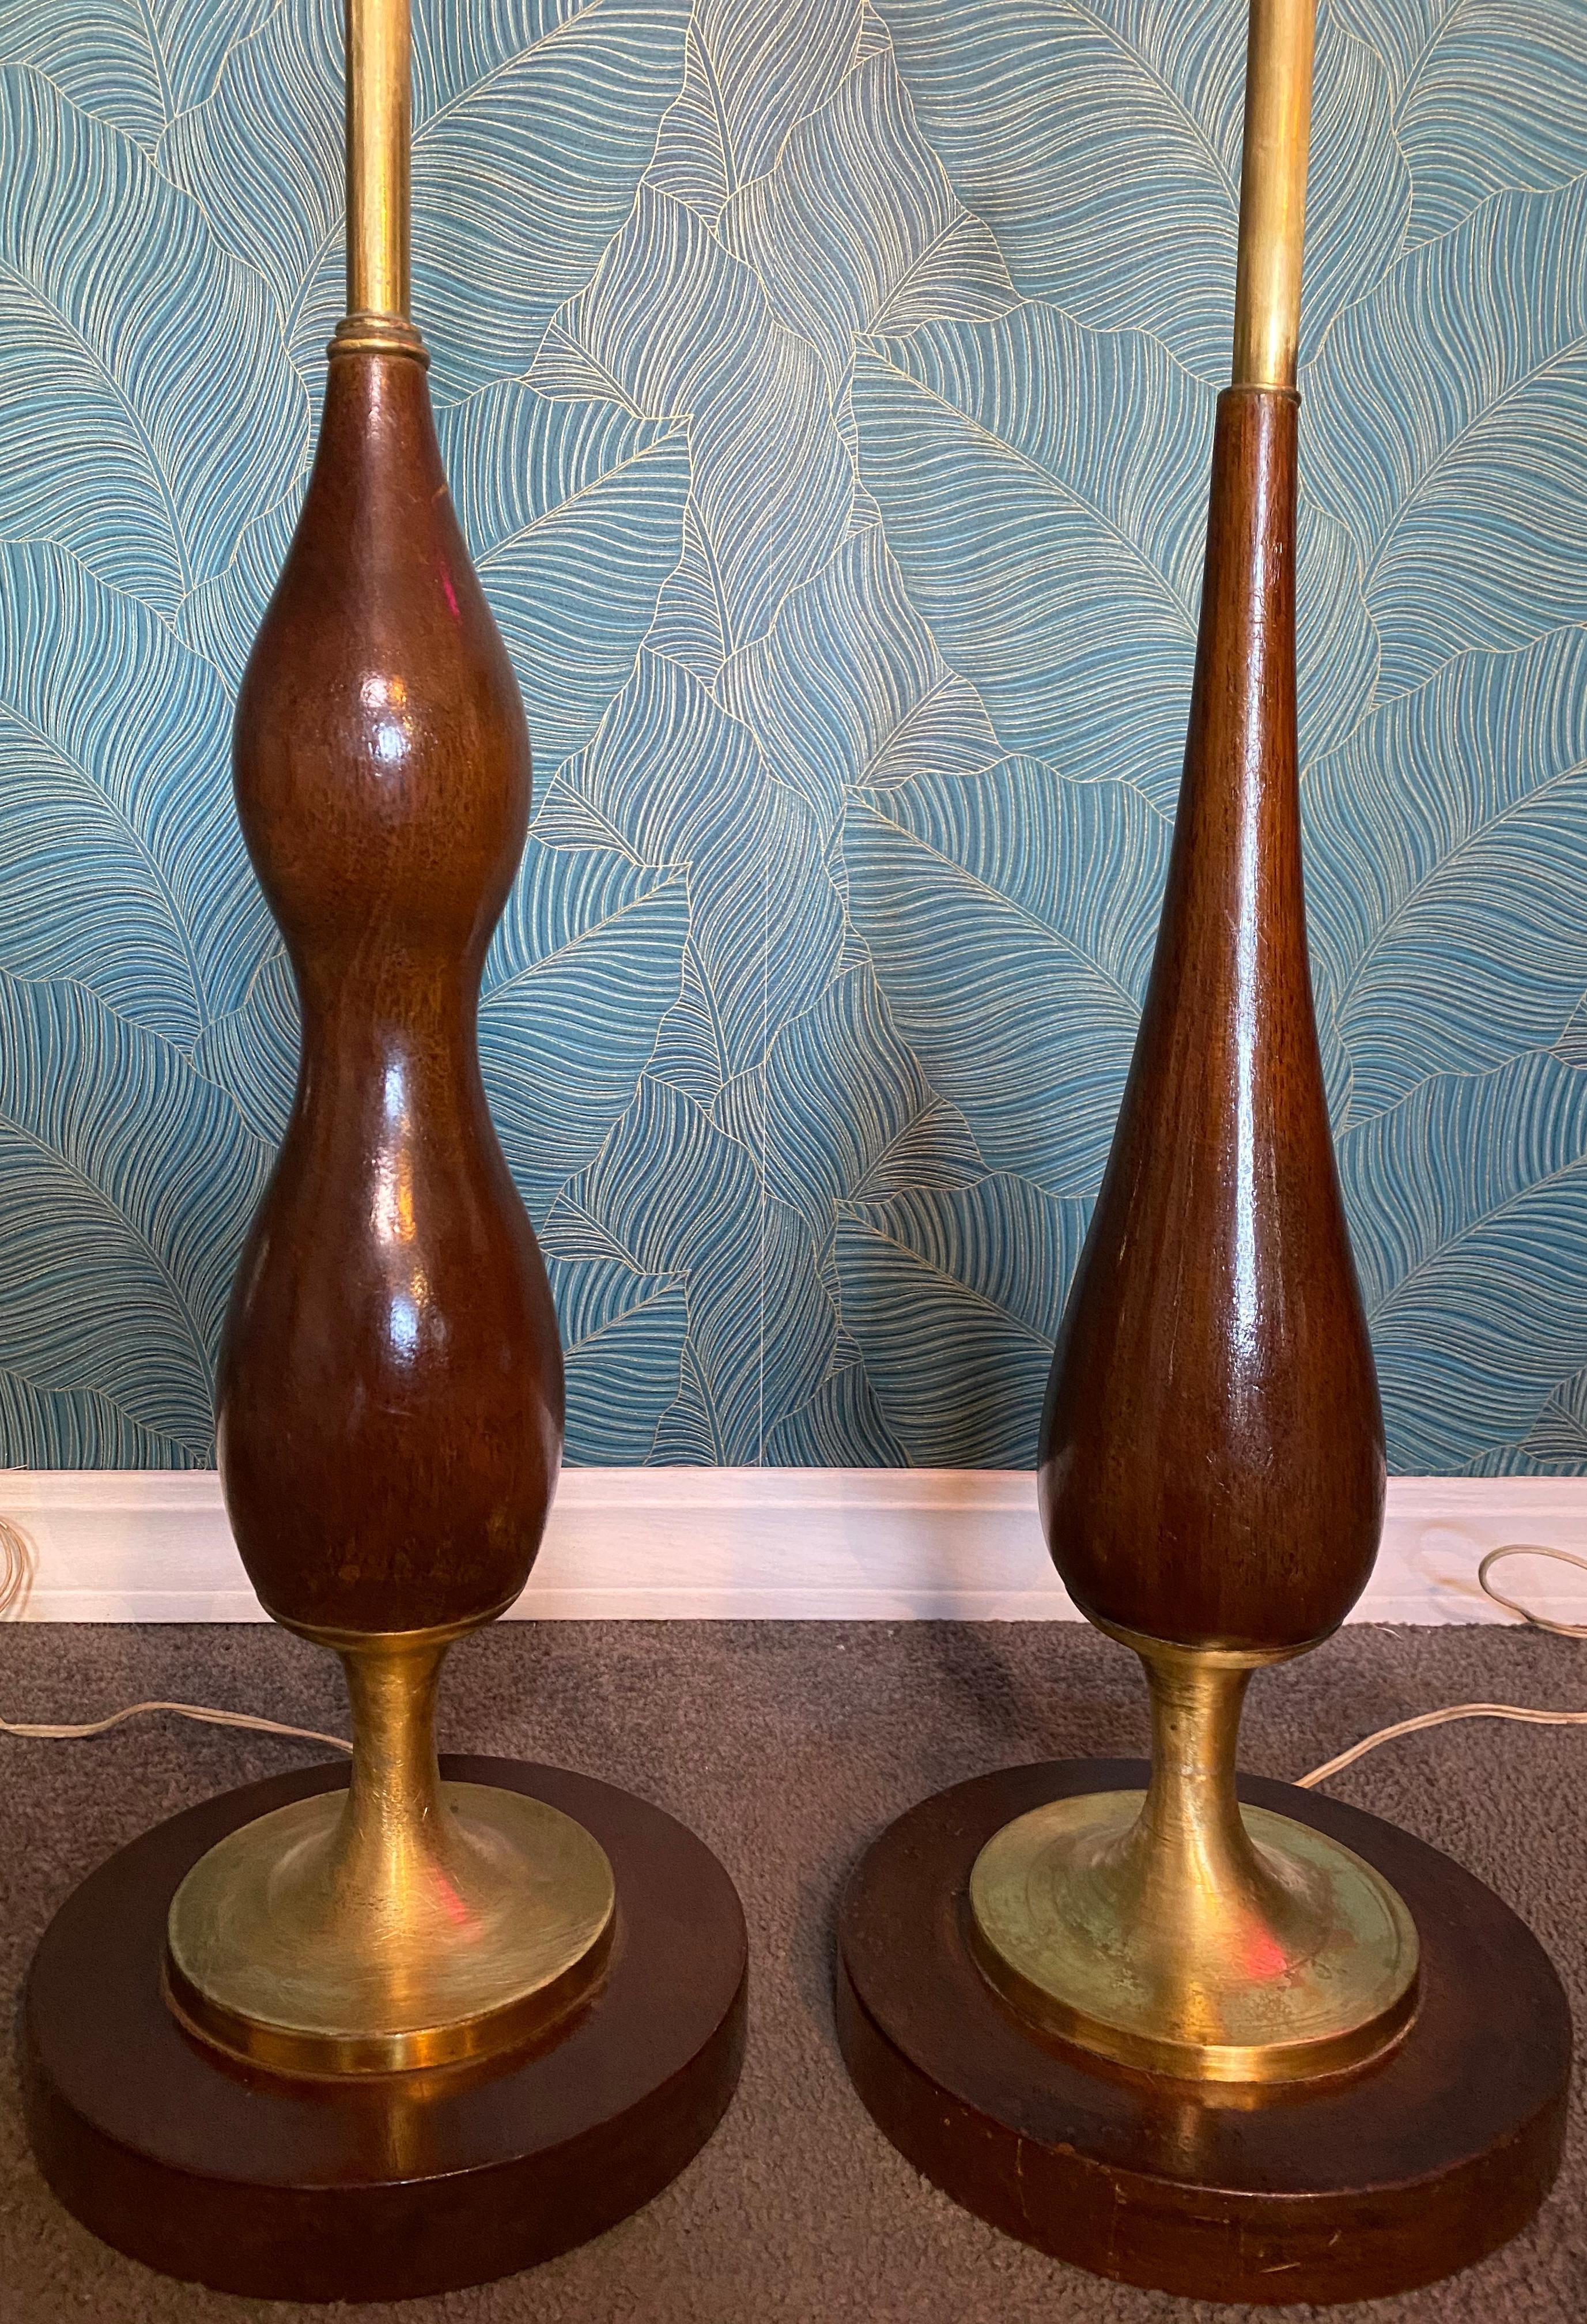 Rare pair of Mexican Mid Century Modern floor lamps.
Turned Mexican mahogany and brass.
Attributed to the sculptor and designer Frank Kyle.
Mexico City, circa 1960s.
Original unrestored vintage condition. x.

 